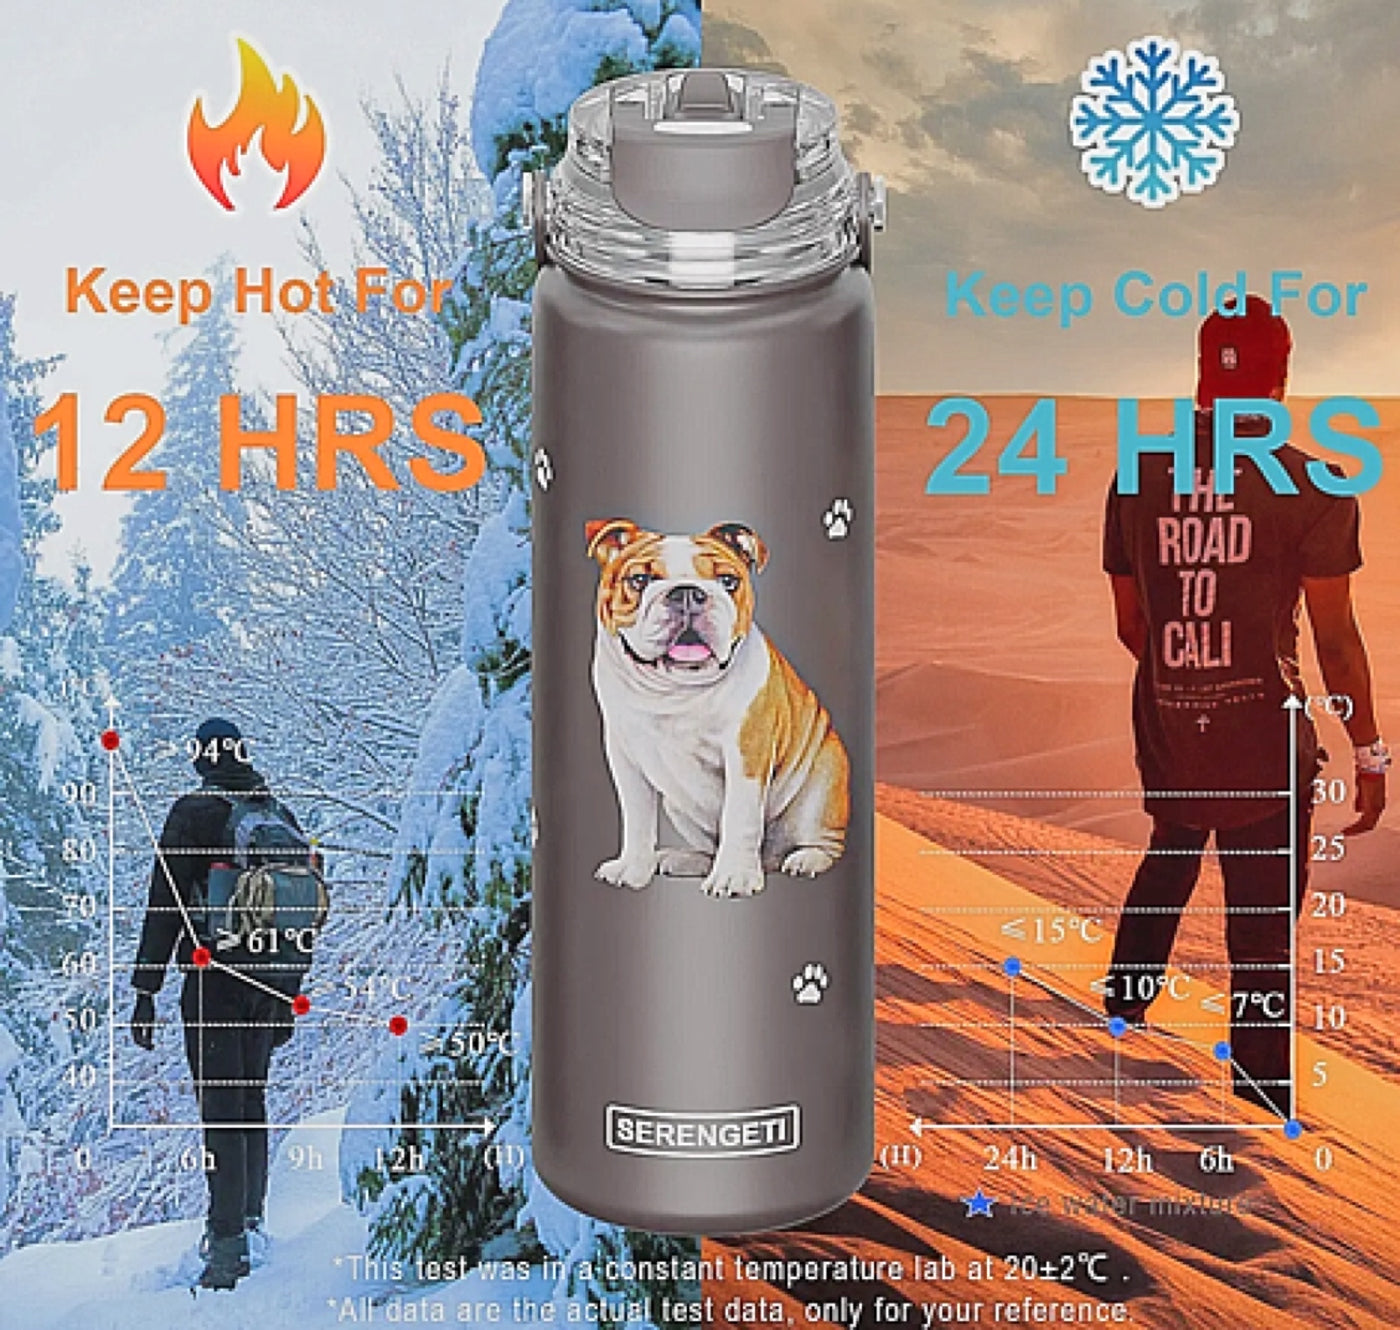 GOLDENDOODLE Dog Stainless Steel 24 Oz. Water Bottle SERENGETI Brand By E&S  Pets